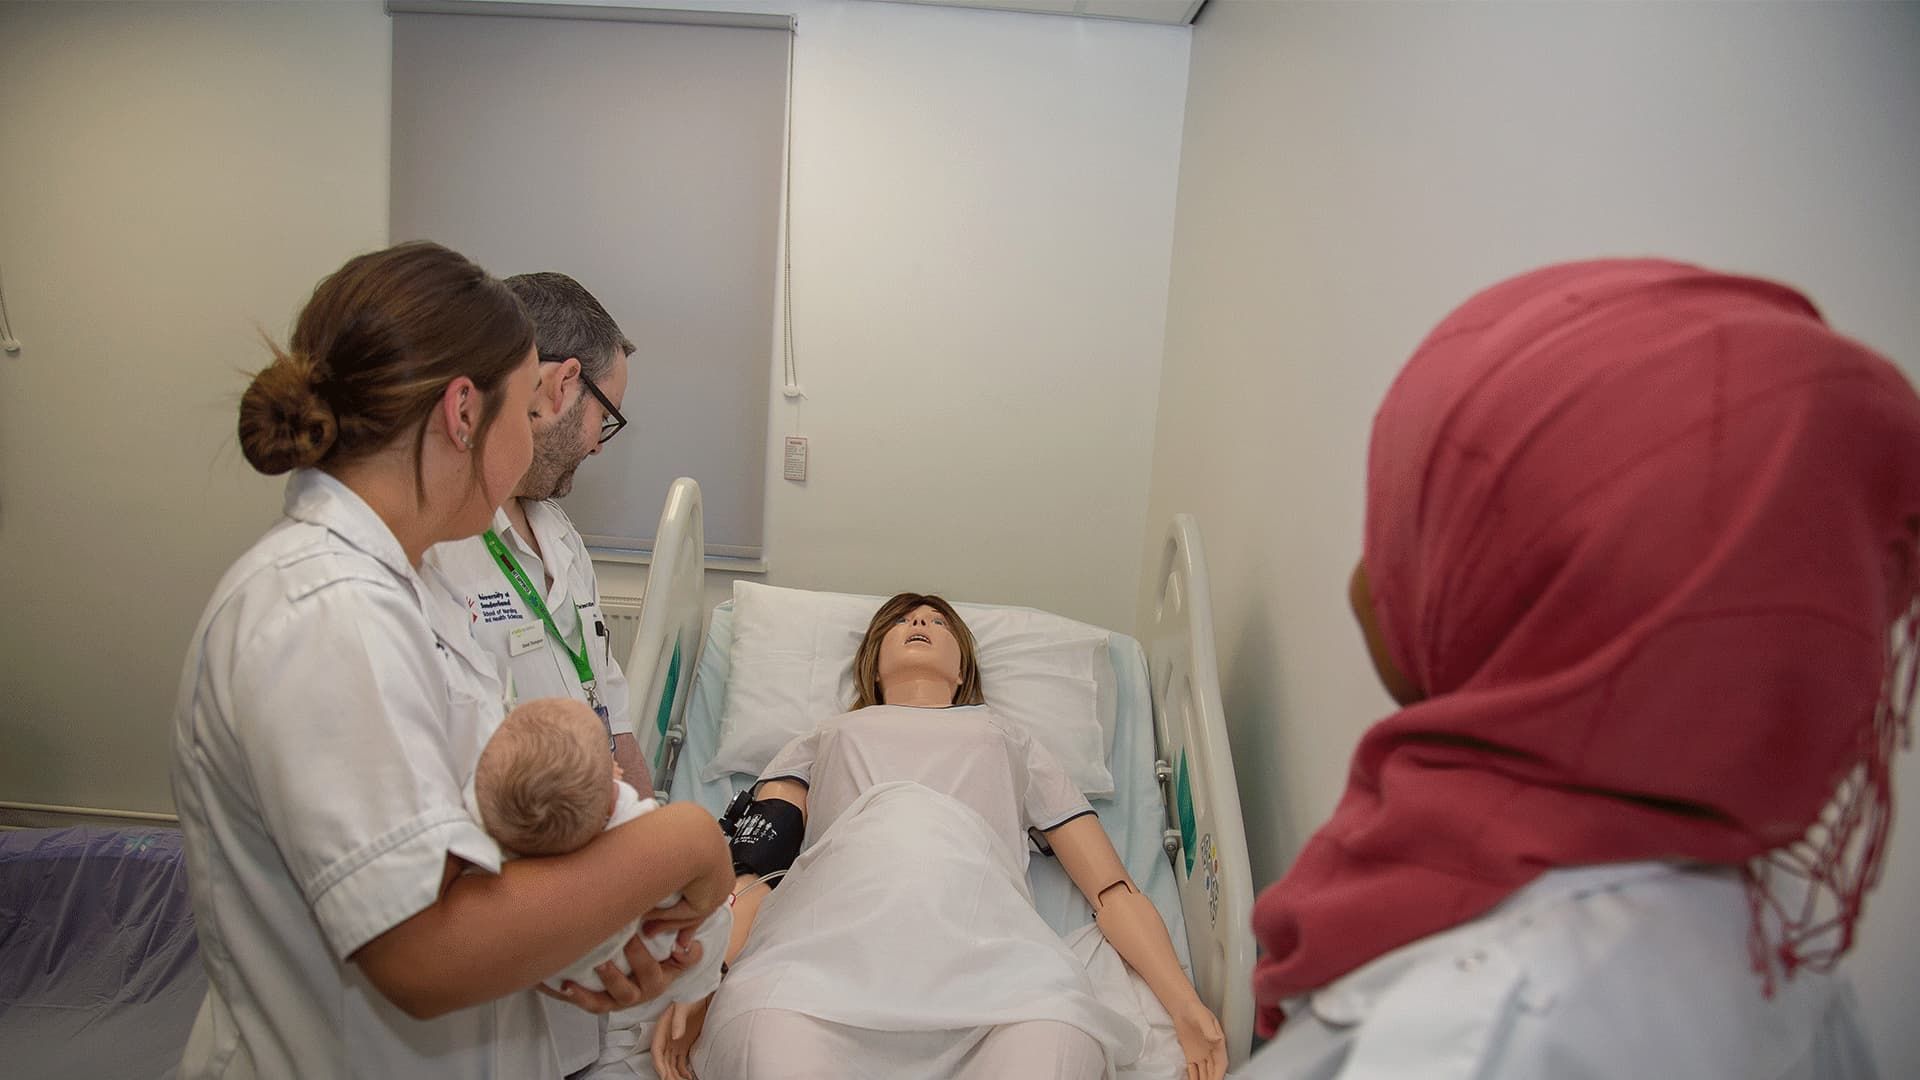 Student midwives and nurses gathered around a manikin, one of them holding the SIM baby